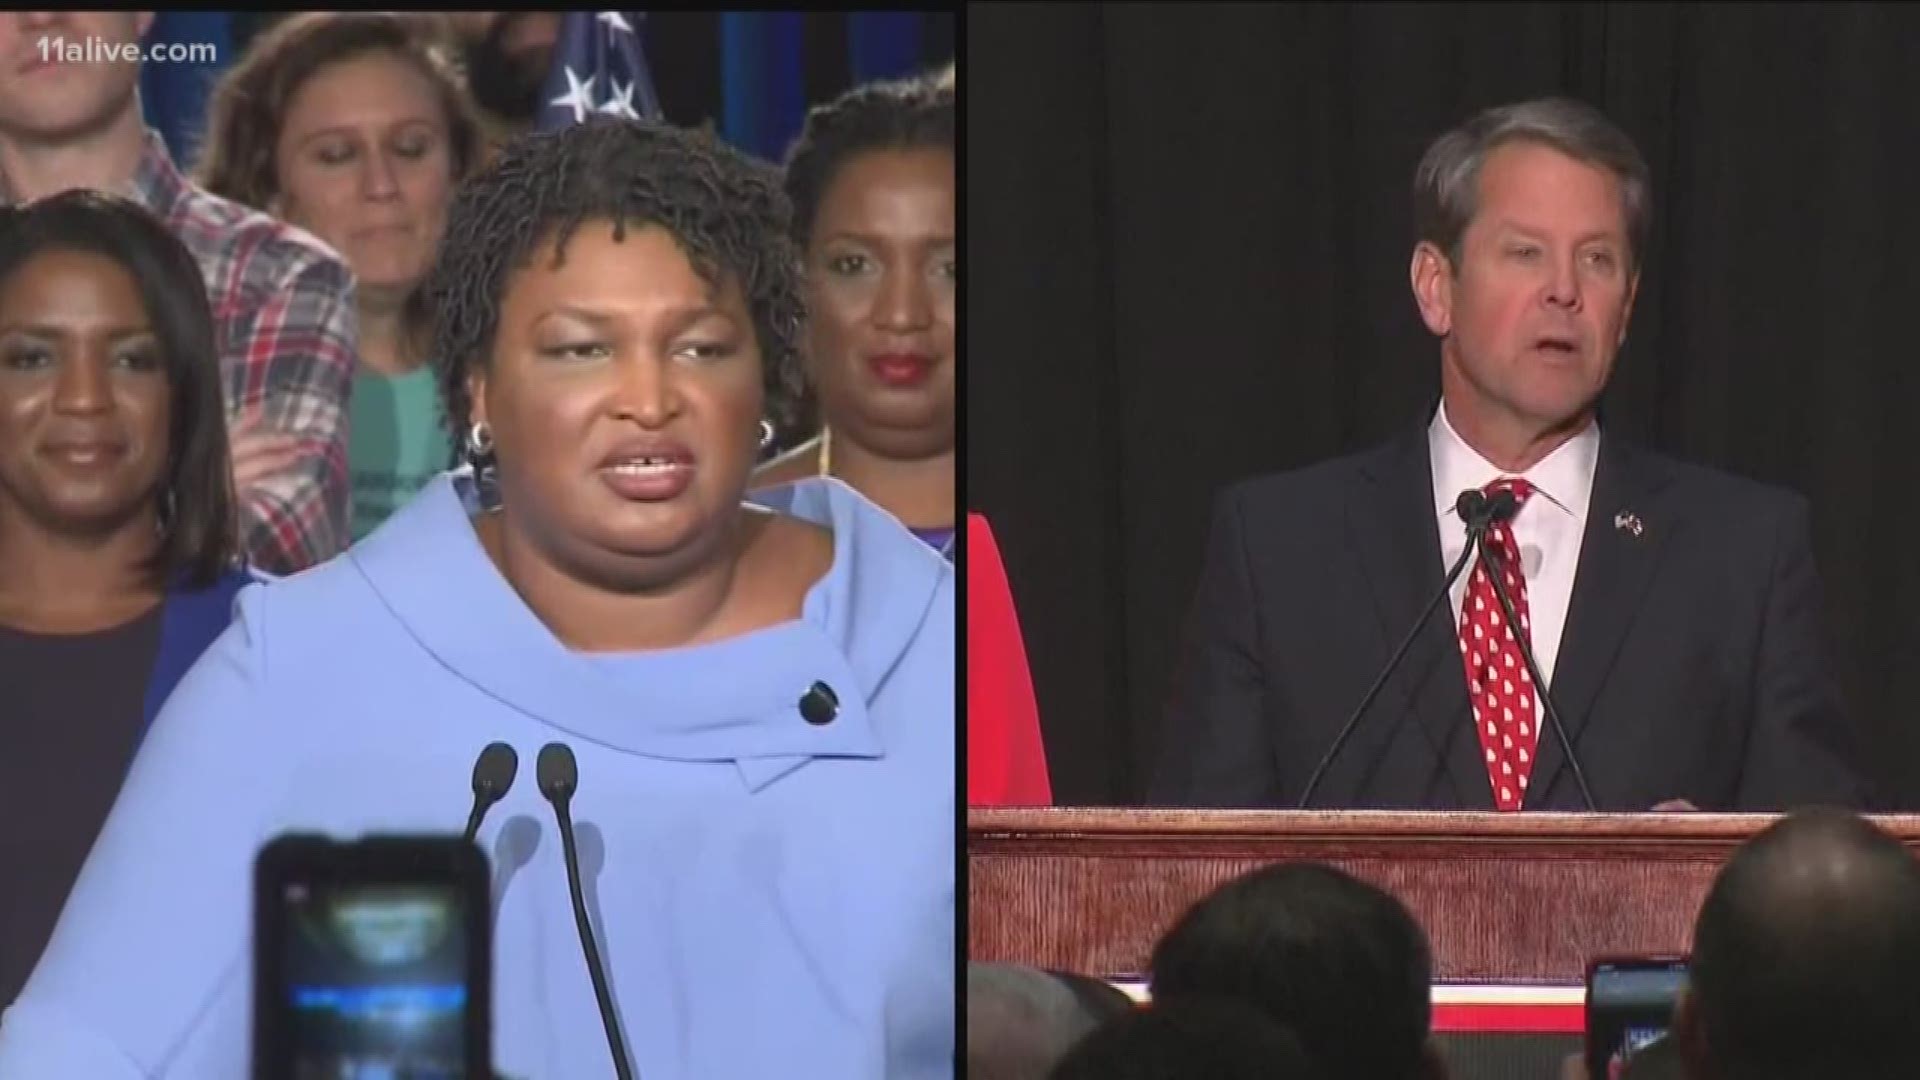 Many in Hollywood supported Democratic candidate Stacey Abrams. Now there is question if the boycott will stick, after Brian Kemp has been acknowledged as governor-elect.